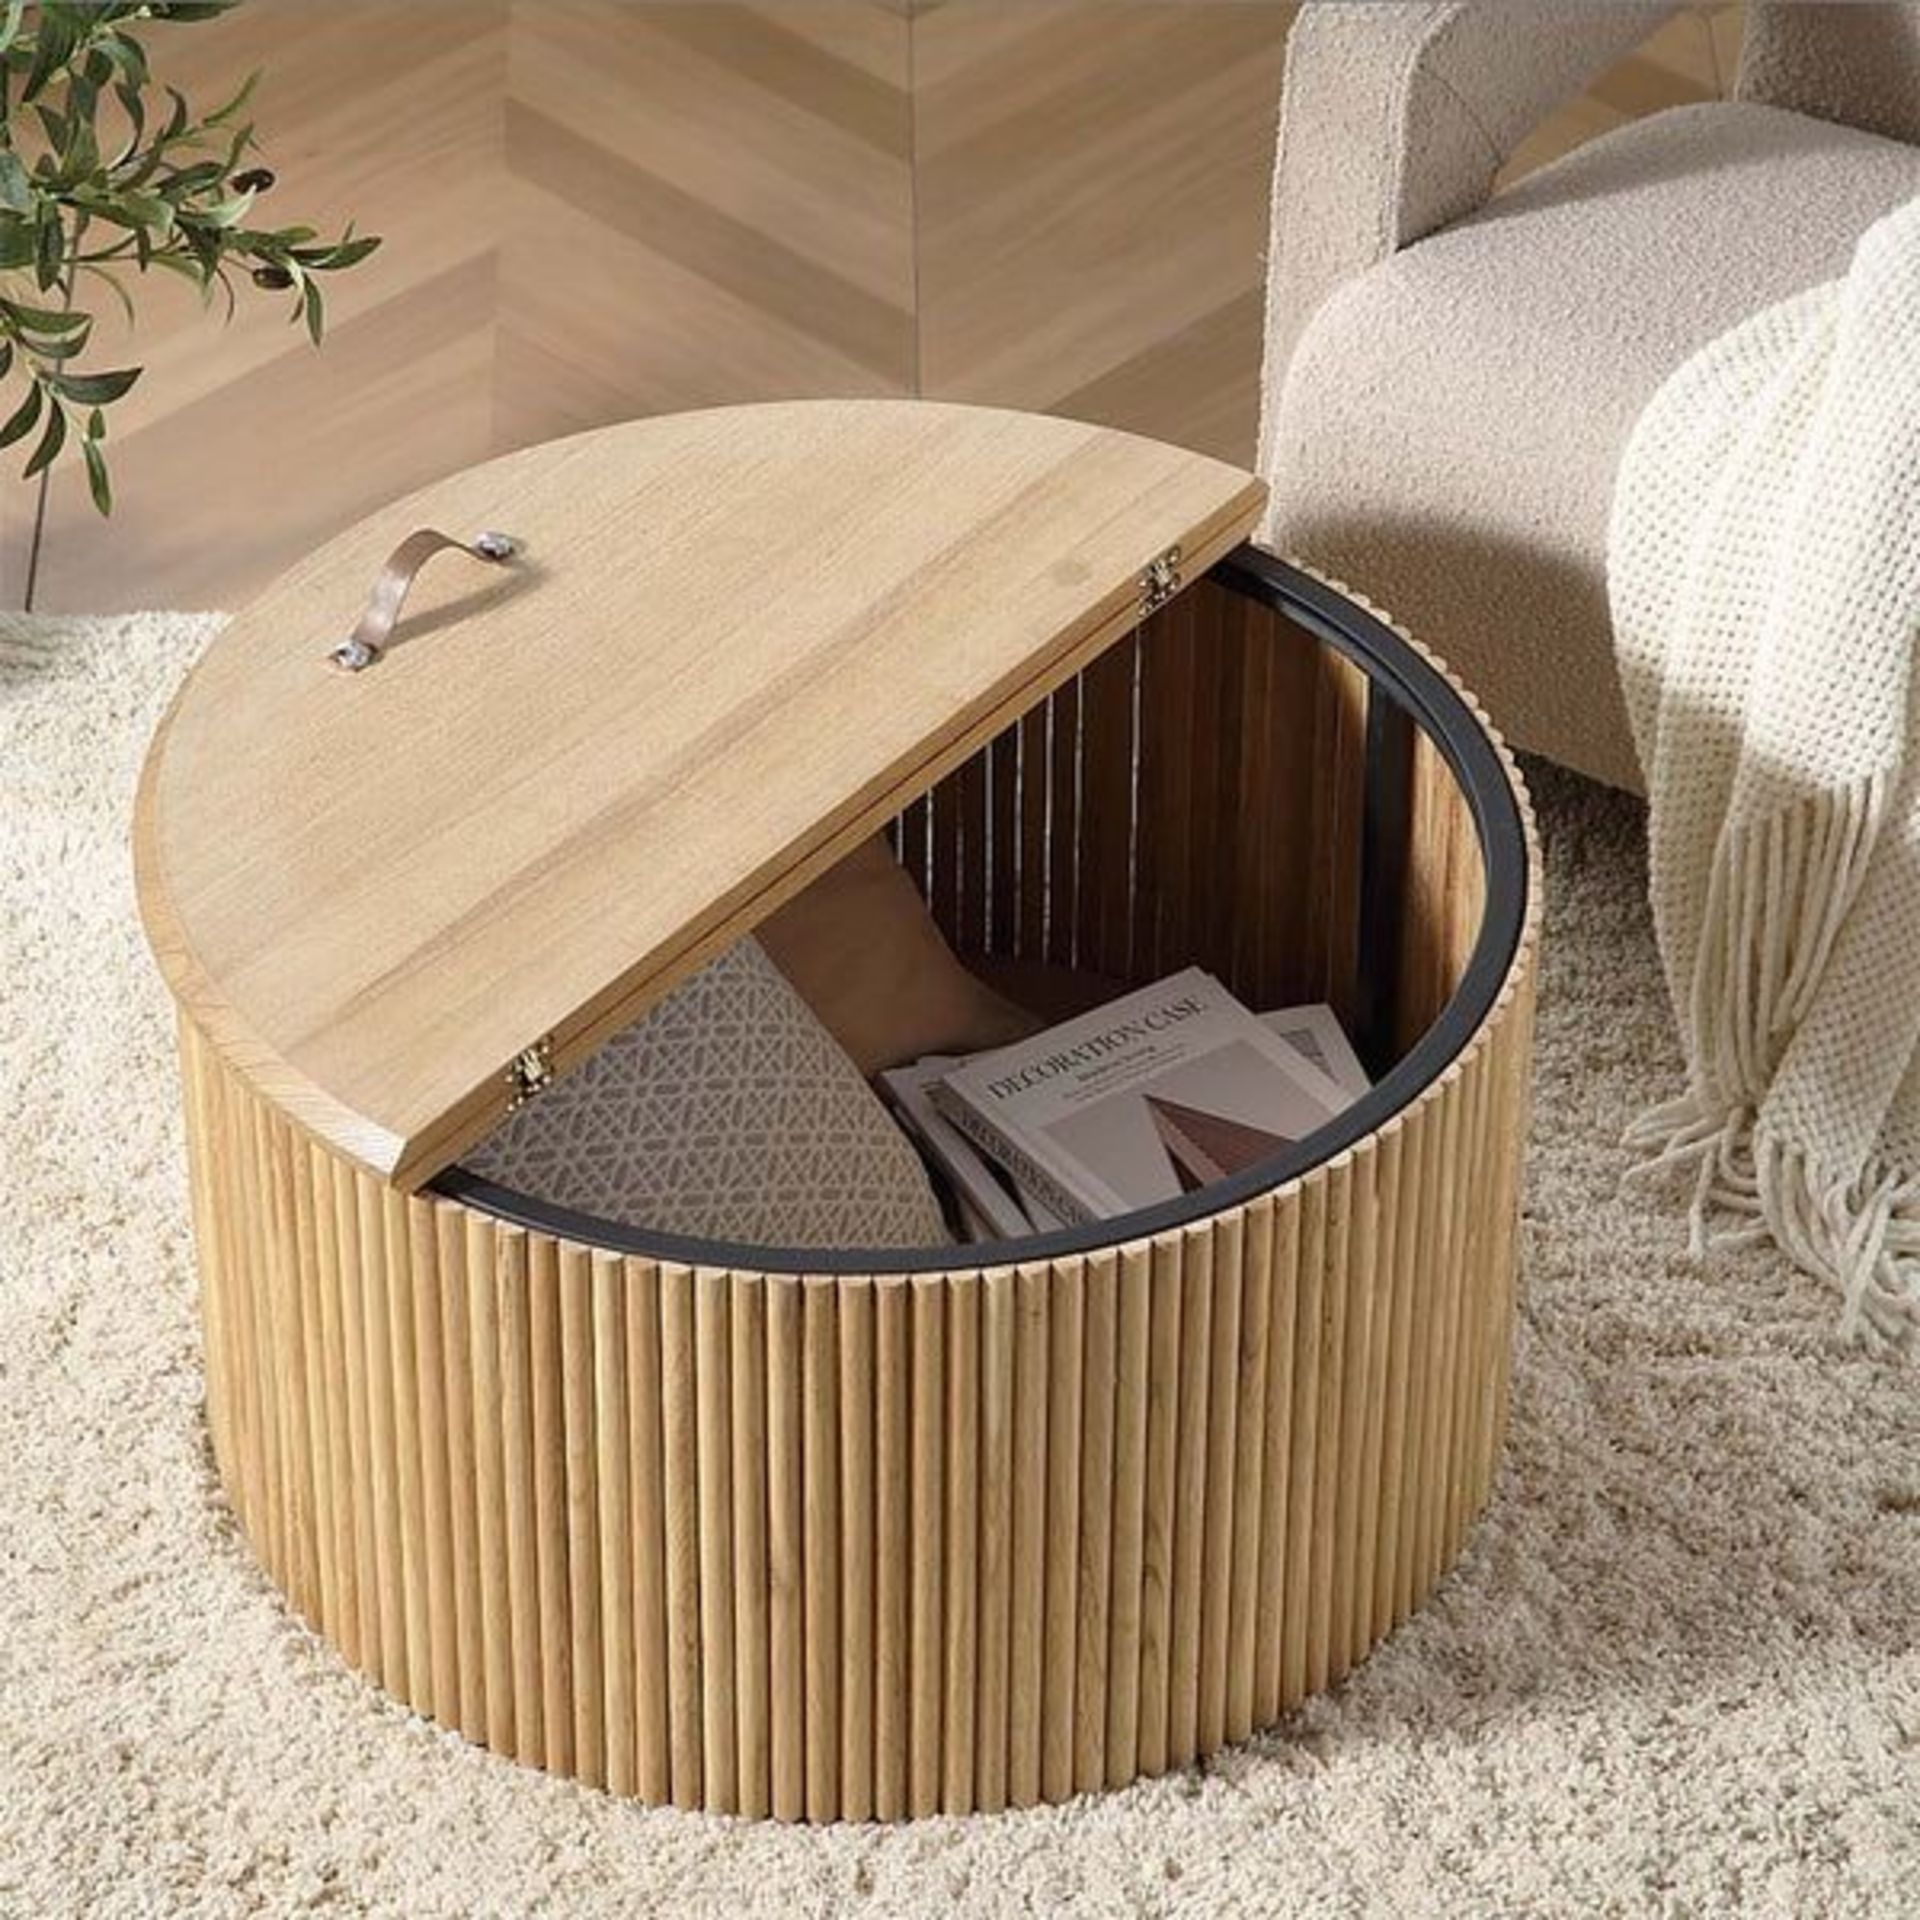 Maru Oak Round Coffee Table with Storage, Oak. - ER31. RRP £349.99. Featuring fluted base made - Bild 2 aus 2